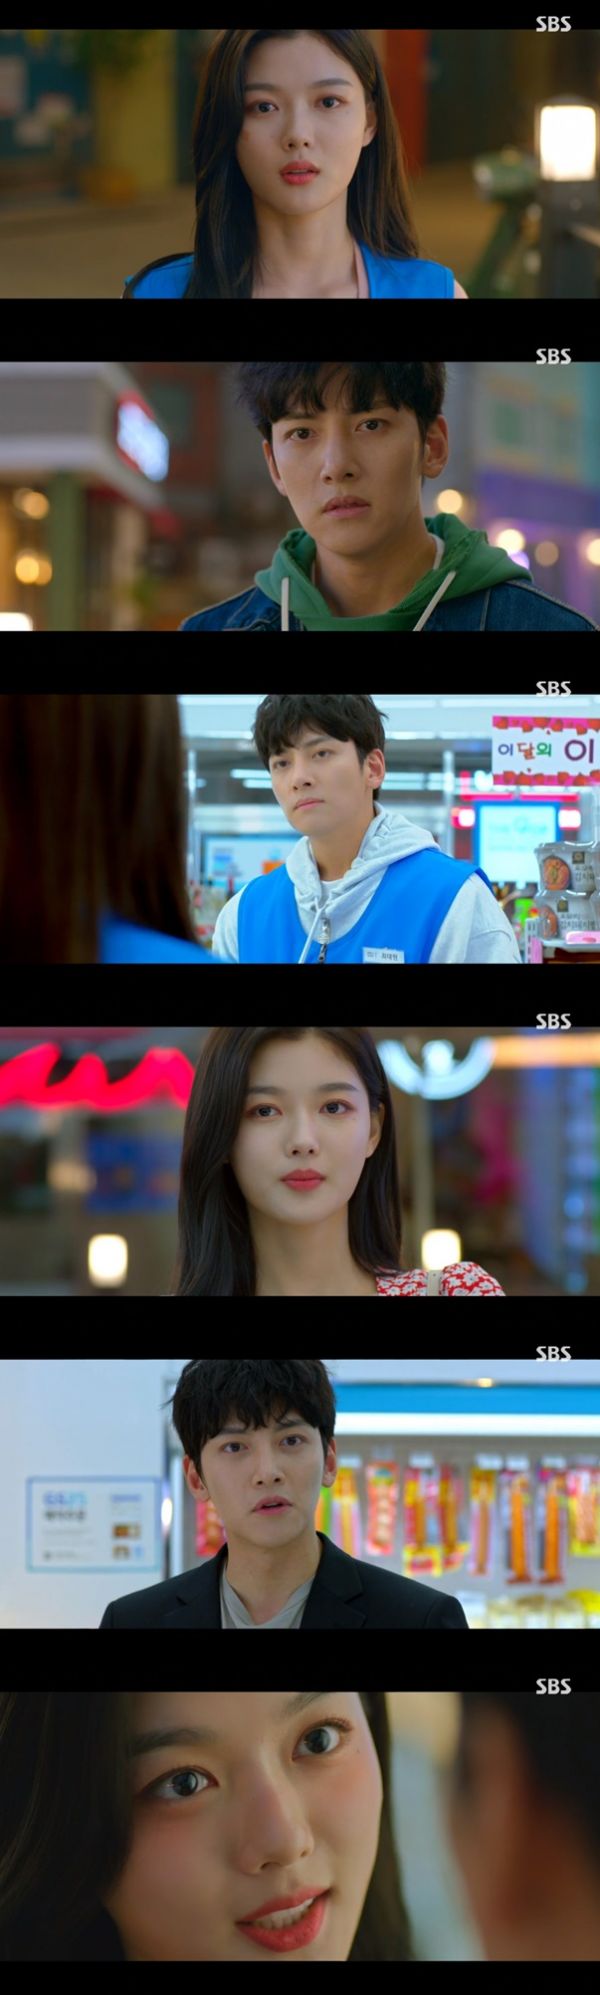 Convenience store morning star Ji Chang-wook and Kim Yoo-jung were tied up as if they were a bad lover.In the SBS gilt drama Convenience store morning star (playplaywright Son Geun-joo and director Lee Myung-woo), which was first broadcast on the 19th, Jung Sae-sung (Kim Yoo-jung) was drawn to the Convenience store of Choi Dae-heon (Ji Chang-wook), the manager of Convenience store.The bad high school girl, Jeong Sae-byeol, asked Choi Dae-heon three years ago to buy tobacco, and Choi Dae-heon bought candy, not tobacco, and said, If you are good, hang up.I am sore. I am an adult and try to be a youth in a more wonderful job. The star had a crush on Choi Dae-heon at first sight, and kissed him at first meeting. He said, Its the first time Ive ever told you to quit tobacco.I dont know what Im going to do with my brother, he said.Three years later, Convenience store manager Choi Dae-heon was saving Alba, and the star of the company applied to Convenience store Alba.Choi Dae-heon remembered and was wary of being a high school student who kissed her three years ago.Choi Dae-heon tried not to pick Alba, and the star gave him a herb car that was good for fatigue recovery.Choi Dae-heon ate it and fell asleep, while the star began working at the Convenience store.In the end, Jung Sae-byeol was hired as an intern, not a formal Alba, and he did his job perfectly without teaching.But Choi Dae-heon remembers the past rogue high school girl, Jung Sa-byeol, and has kept an eye on his behavior.Then he misunderstood the star as cash, tobacco thief. When he learned it, he said, My mother said that she took money because she had a hurry.Youre just like everyone else after all. You dont listen to me, you judge me. Its okay. Its not like this once or twice.However, the star came back to the Convenience store, and Choi Dae-heon replaced the work and expressed sorry for the star.So the star started work again at the Convenience store.One day Choi Dae-heon changed his shift after saying he was meeting with GFriend Yoo Yeon-ju (Han Seon-hwa), and the star was straight.He asked, Why are you talking about this crooked thing when Im GFriend? Are you jealous?So, the star said, I feel sorry for the GFriend. Michael, Ill always see him, and then Ill fall in love with GFriend.Please tell GFriend that I am sorry in advance. 